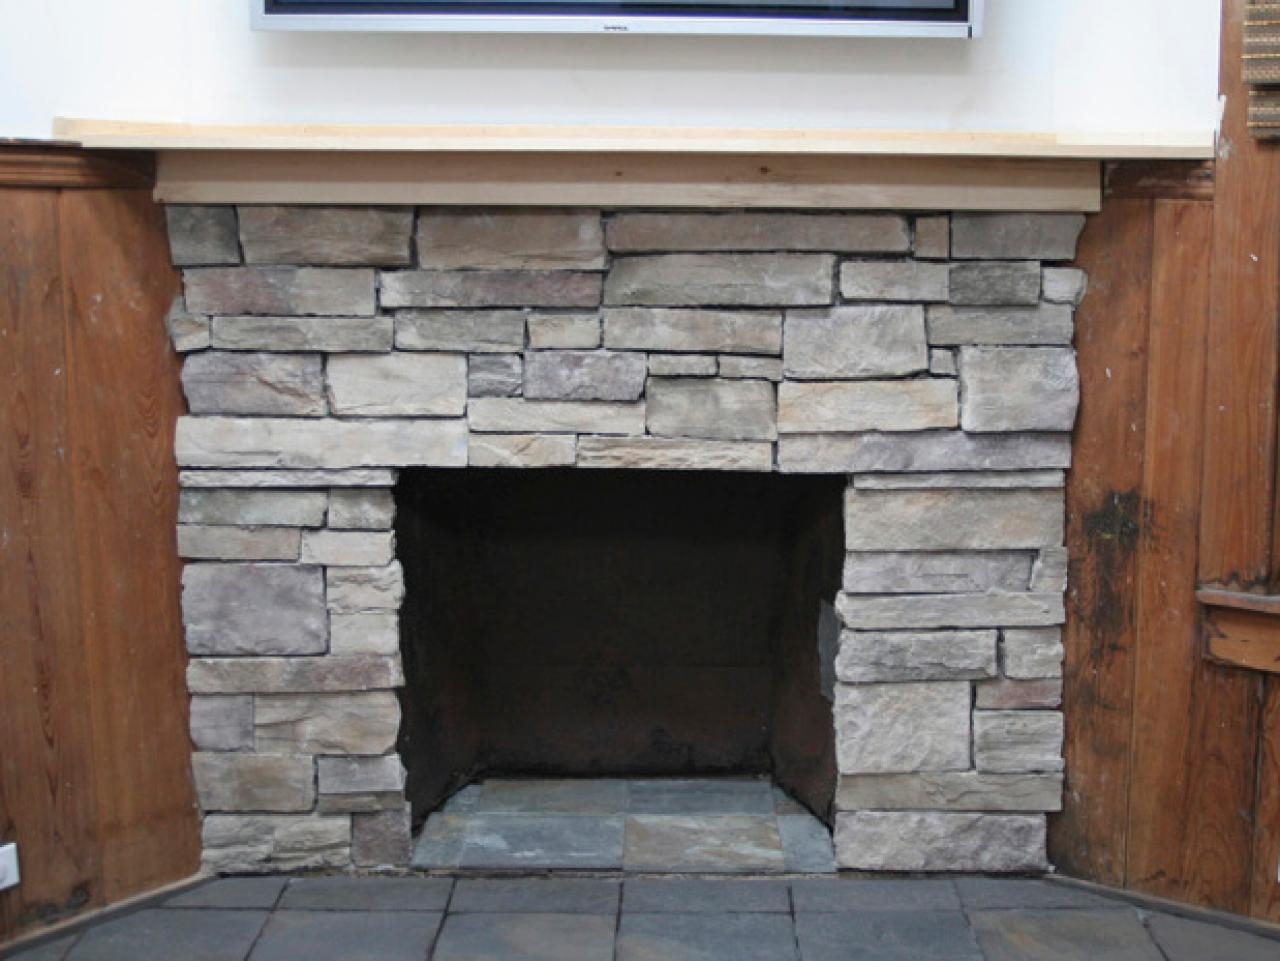 Arnold Stove and Fireplace Unique Brick Fireplace Cover Up Charming Fireplace